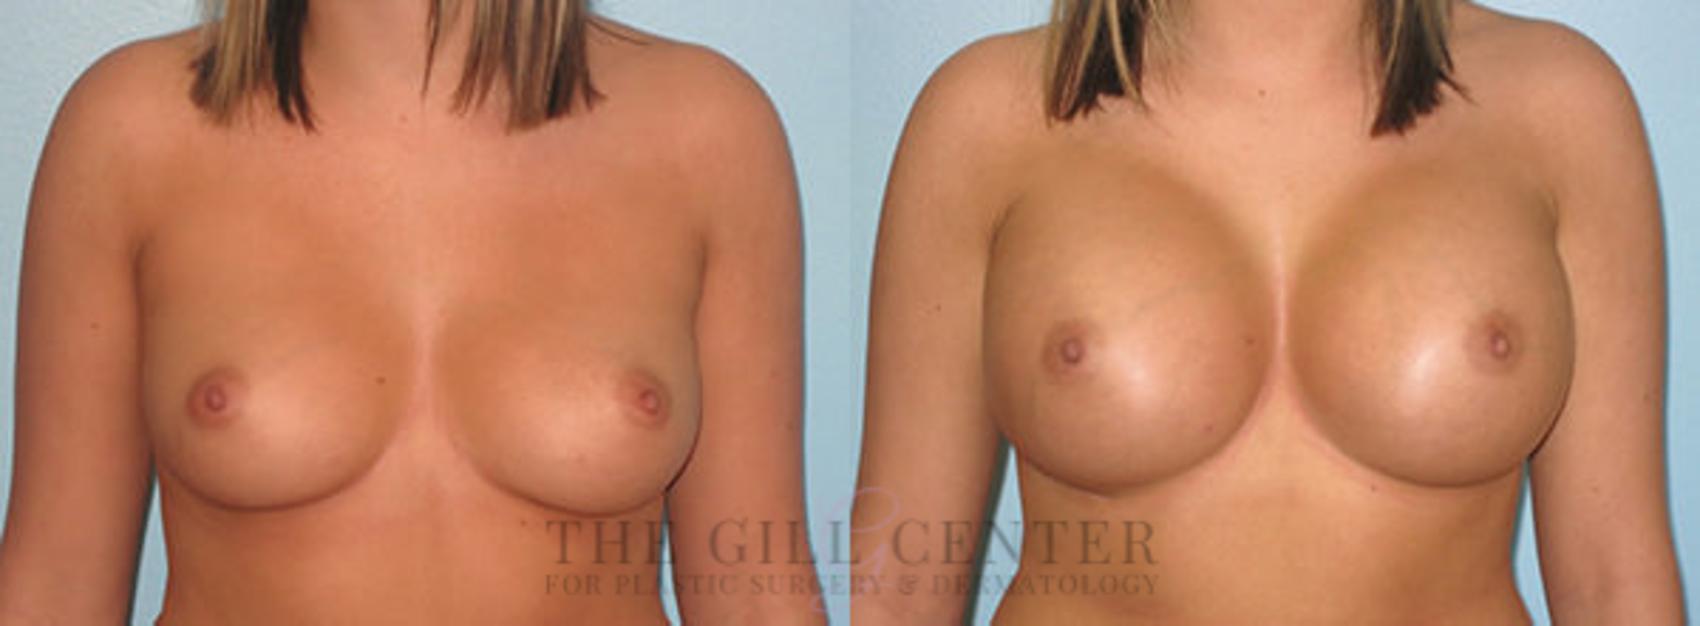 Breast Augmentation Case 38 Before & After Front | The Woodlands, TX | The Gill Center for Plastic Surgery and Dermatology